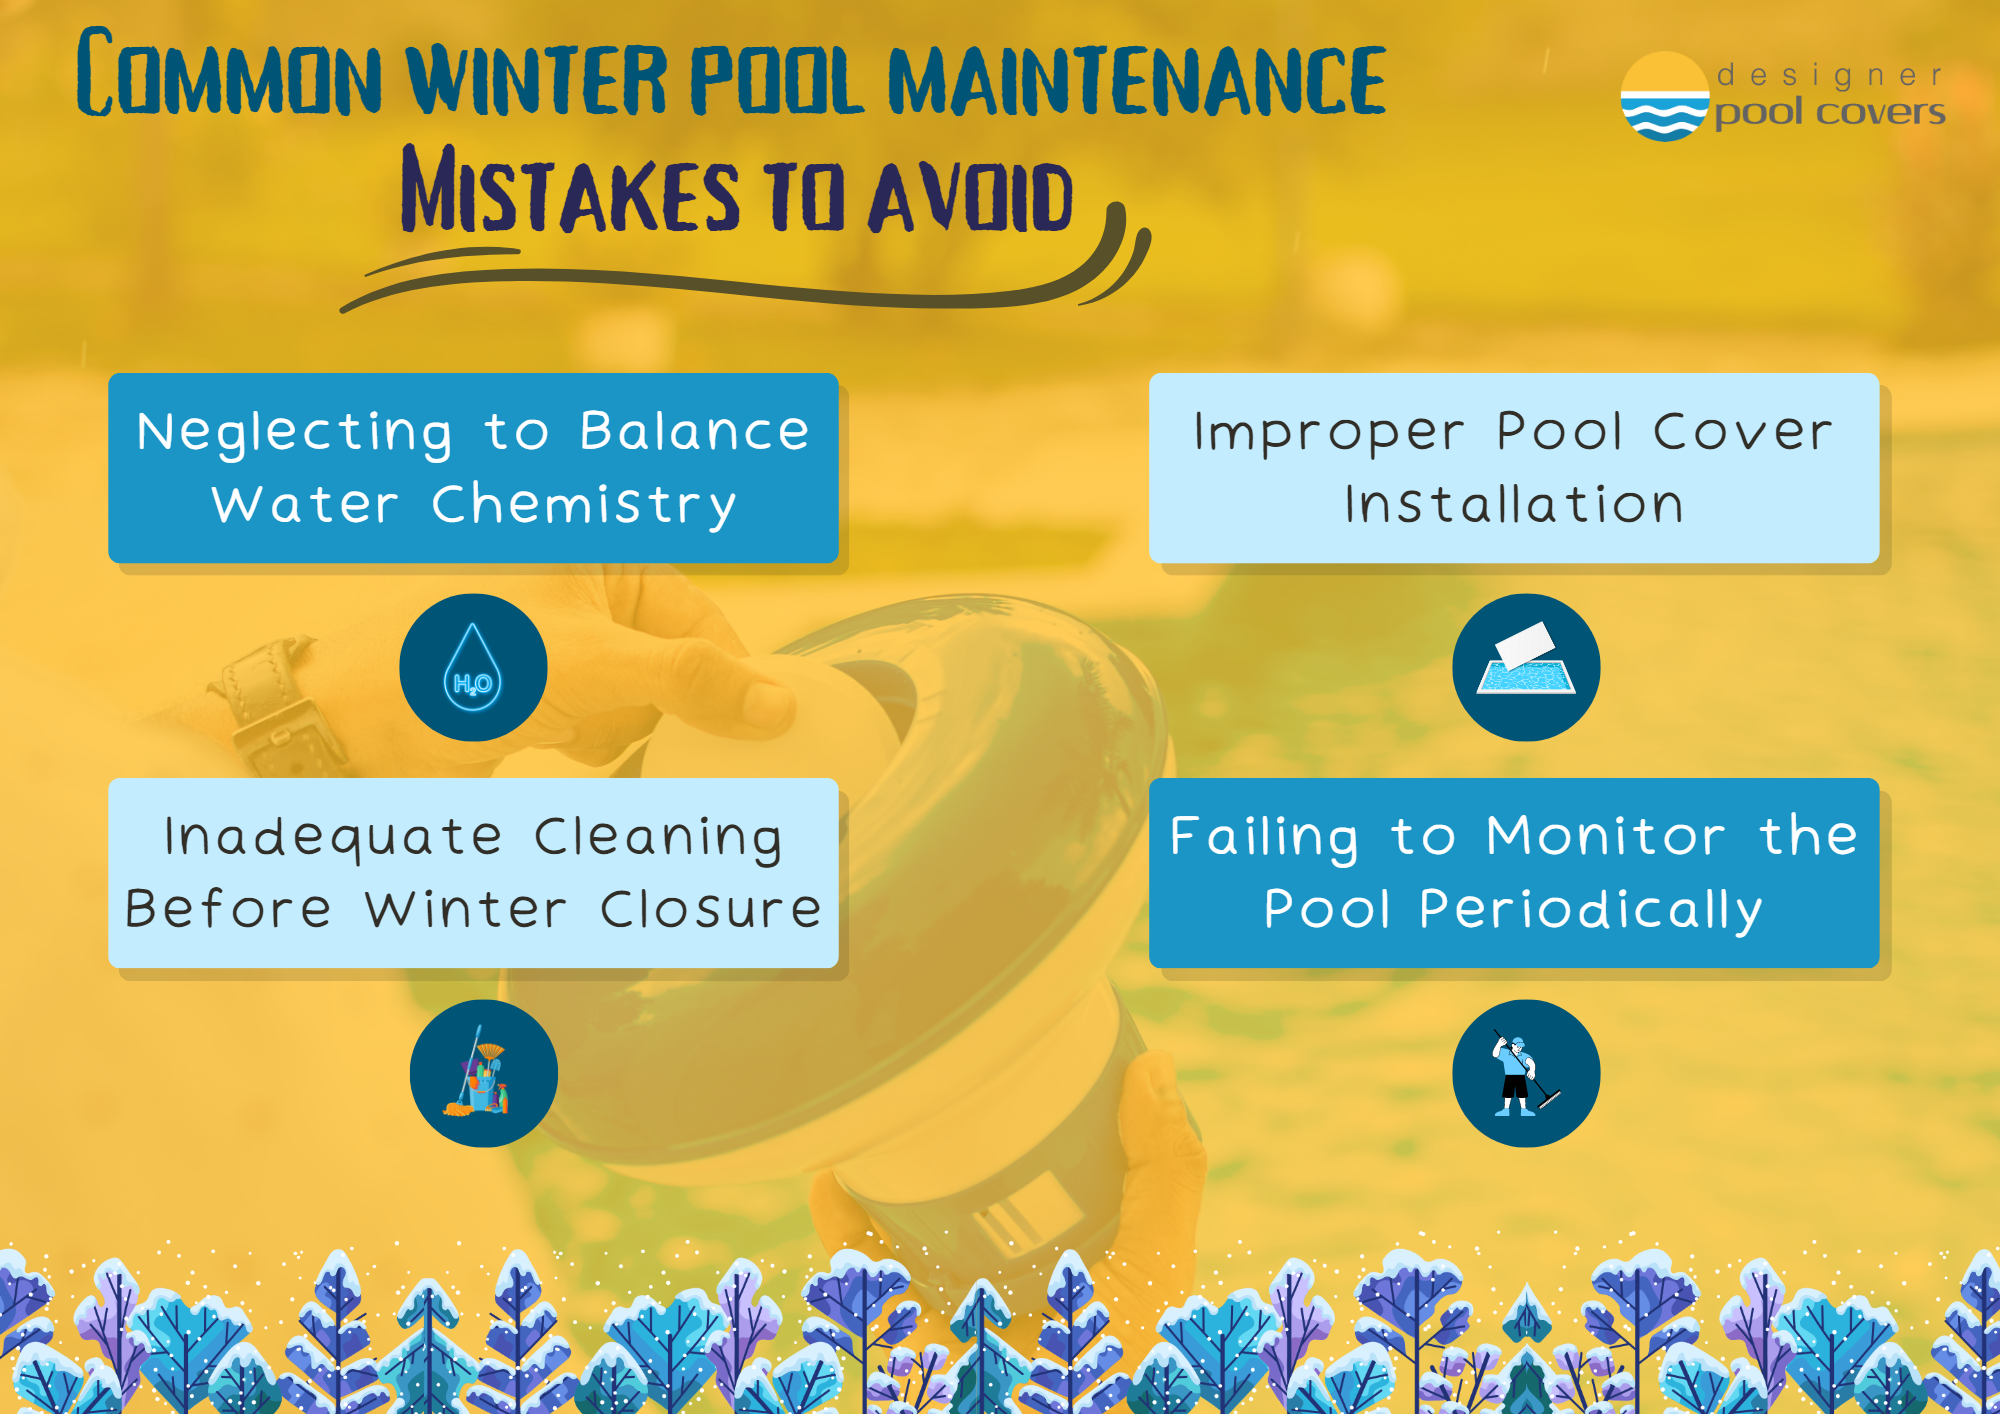 Common mistakes to avoid during winter pool maintenance